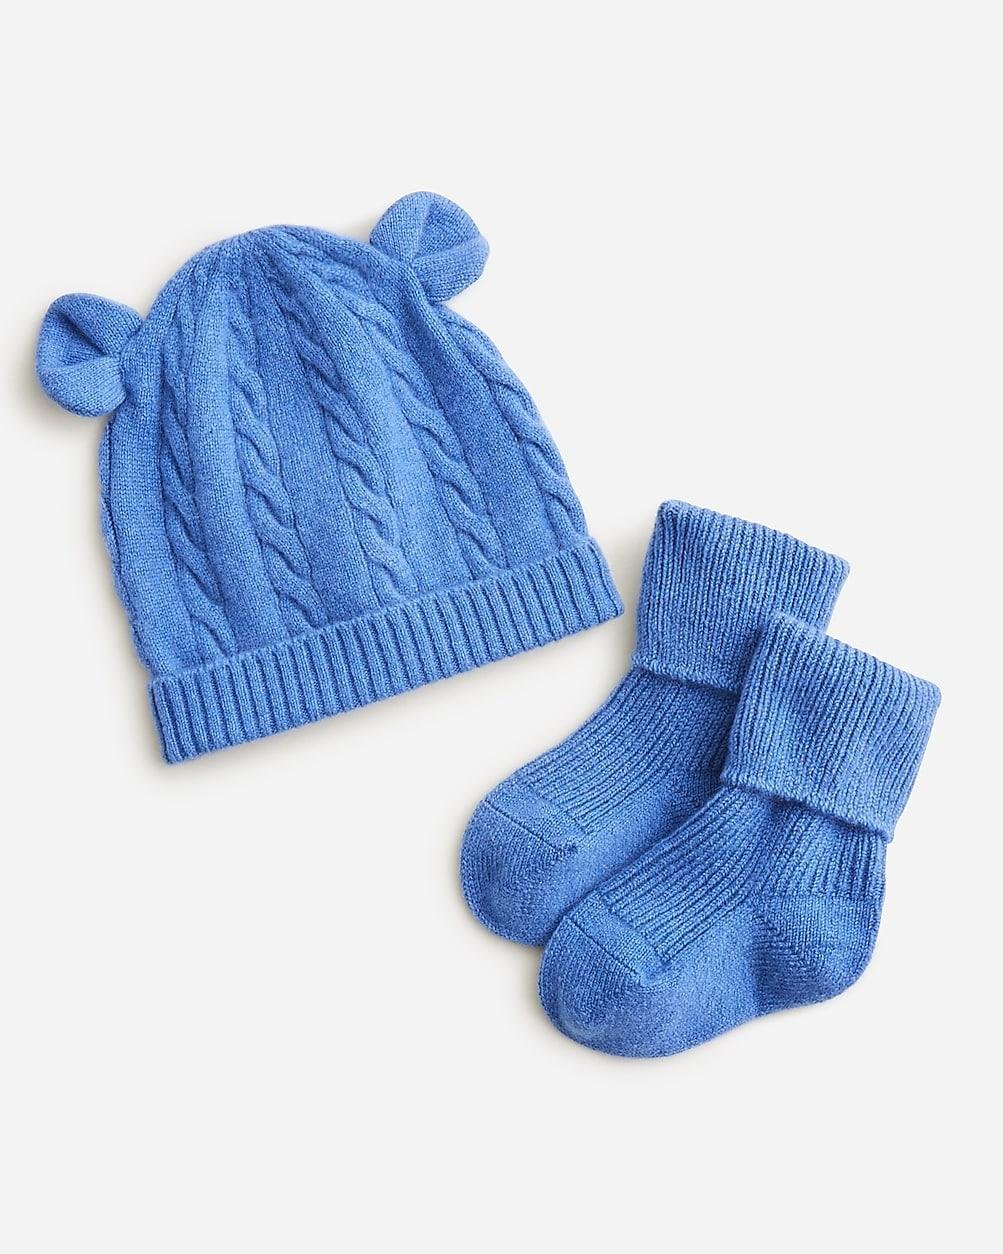 Limited-edition baby cashmere beanie and booties set by J.CREW